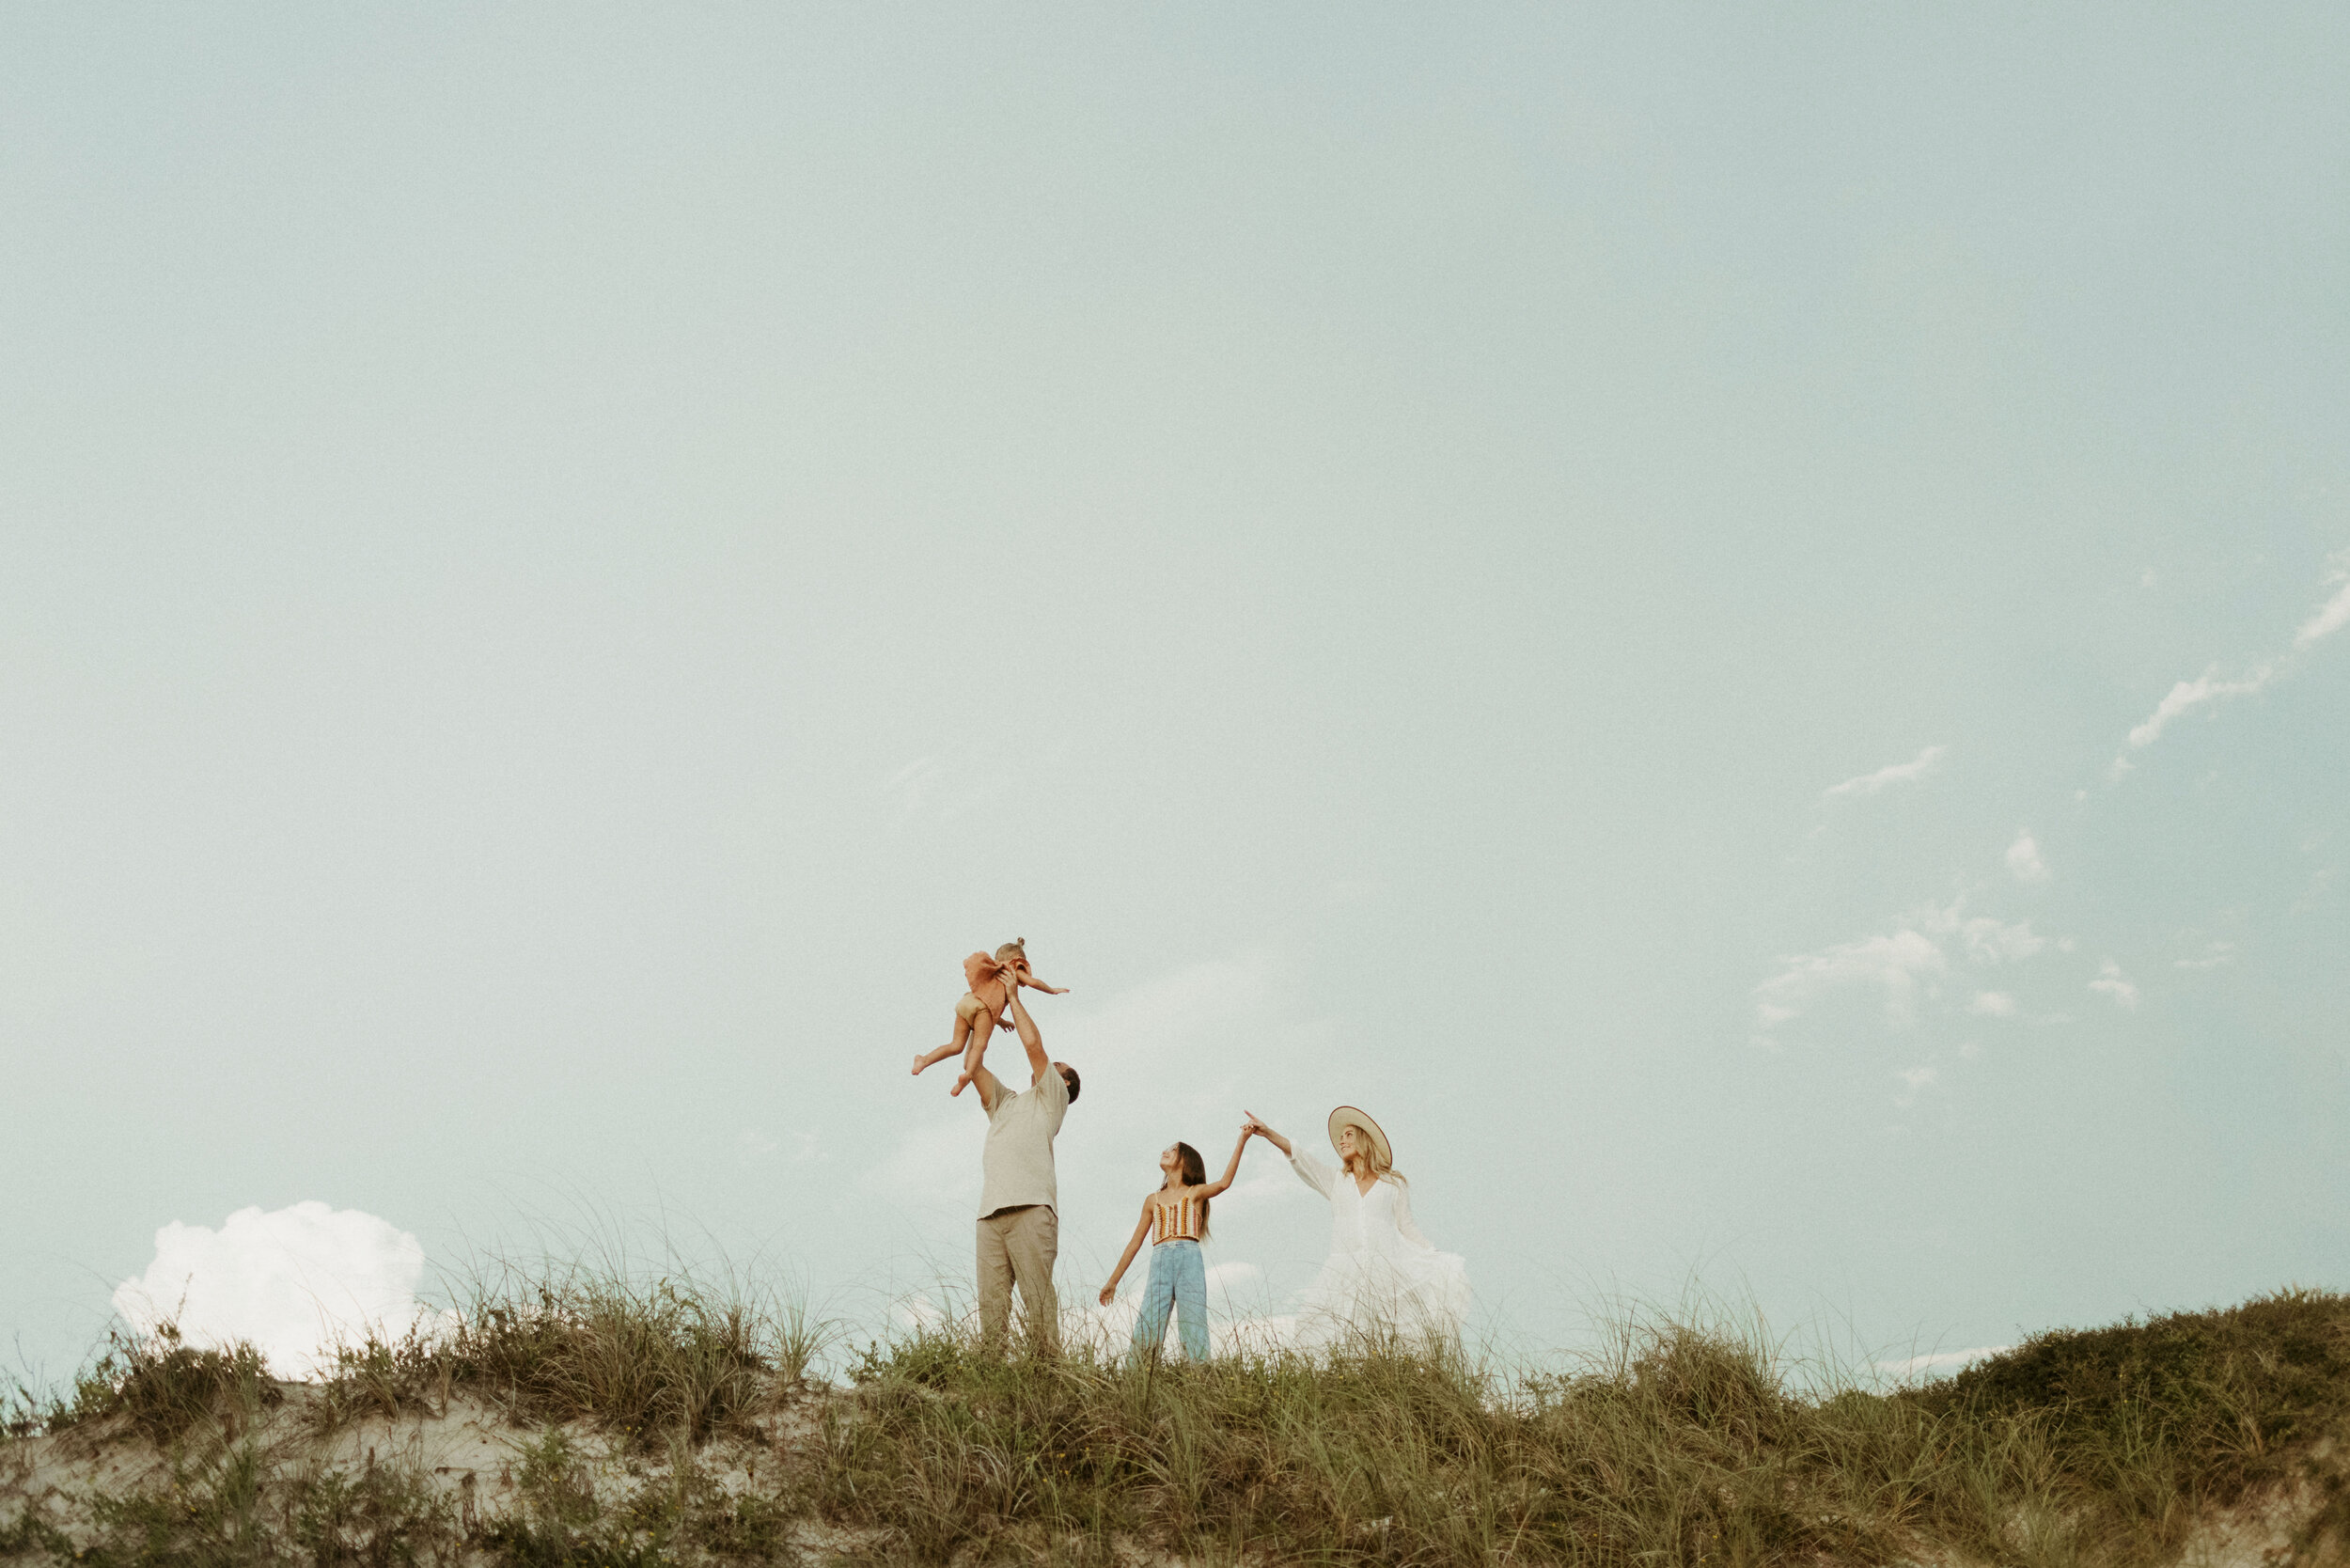 Inlet Beach, FL Family Session || by Kayla Nicole Photography, includes a family enjoying the beach